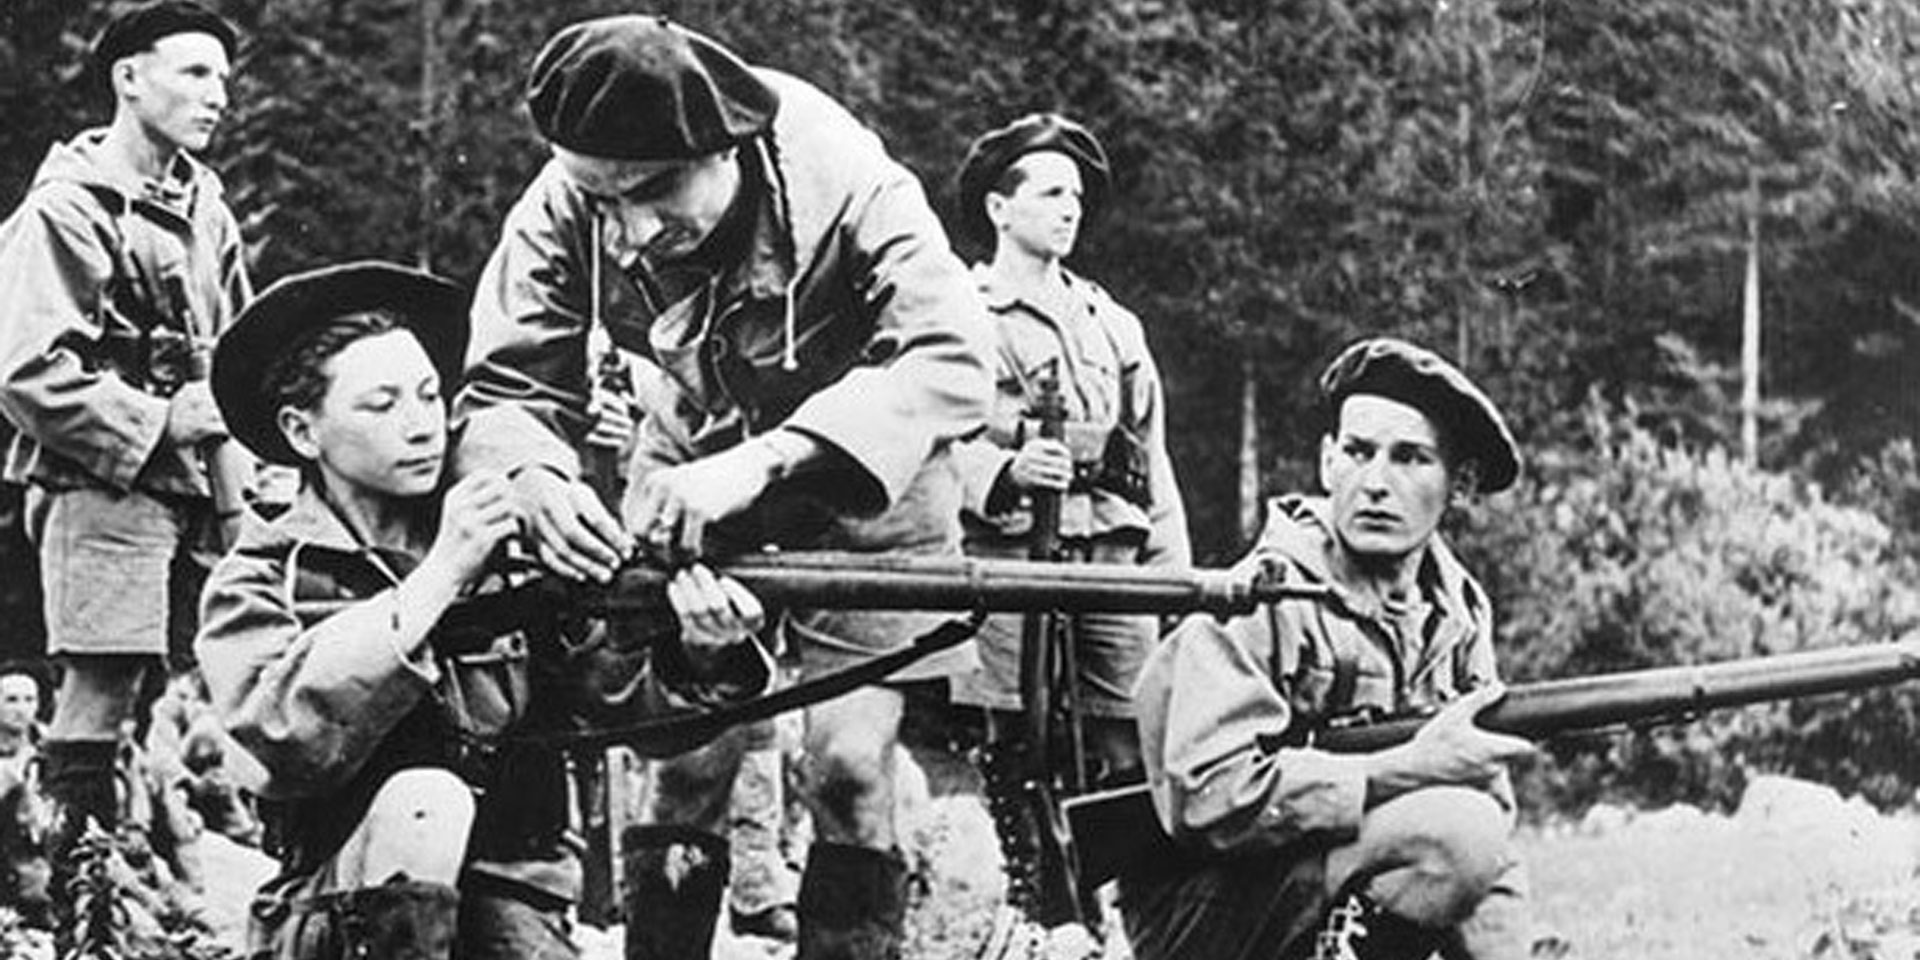 World War II French Resistance Enfield Rifles Go Up for Sale